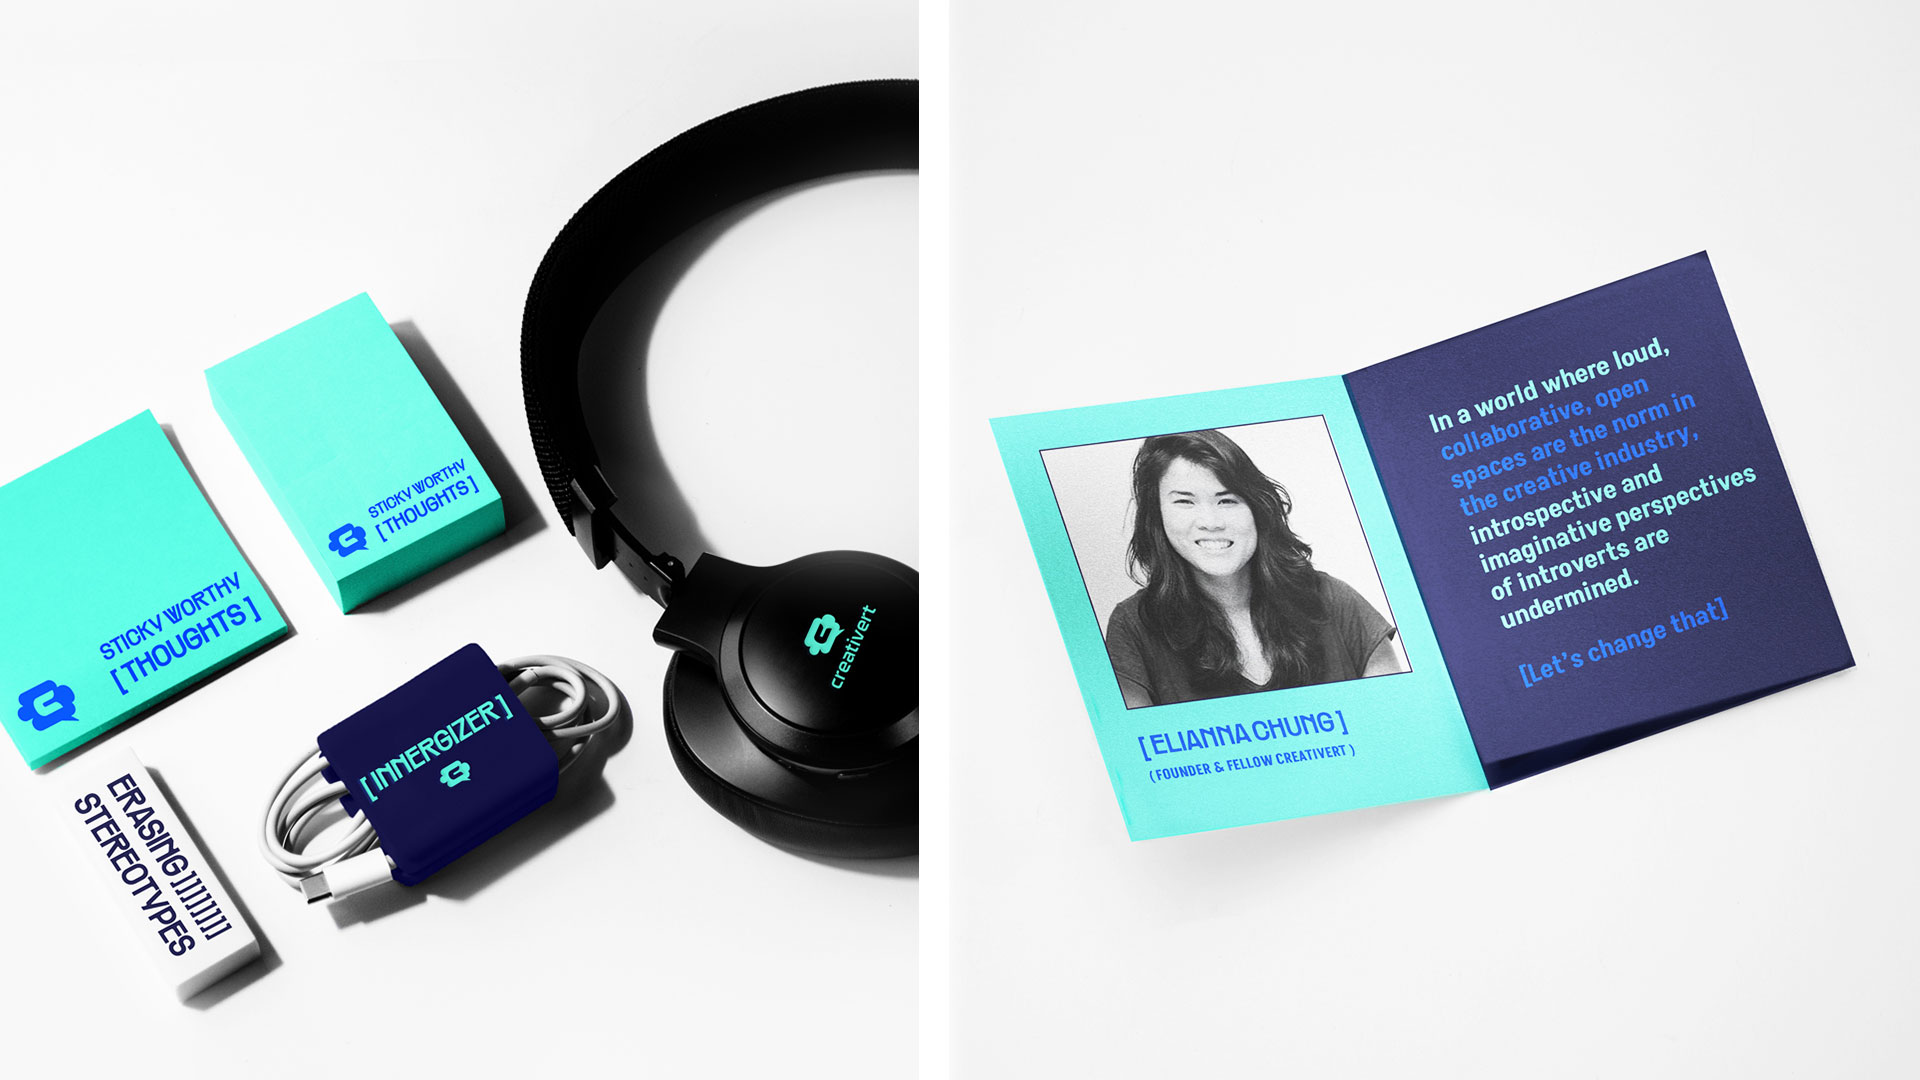 A branded kit consisting of headphones, sticky notes, erasers, chargers, and a guidebook designed to build understanding between introverts and their creative teammates.